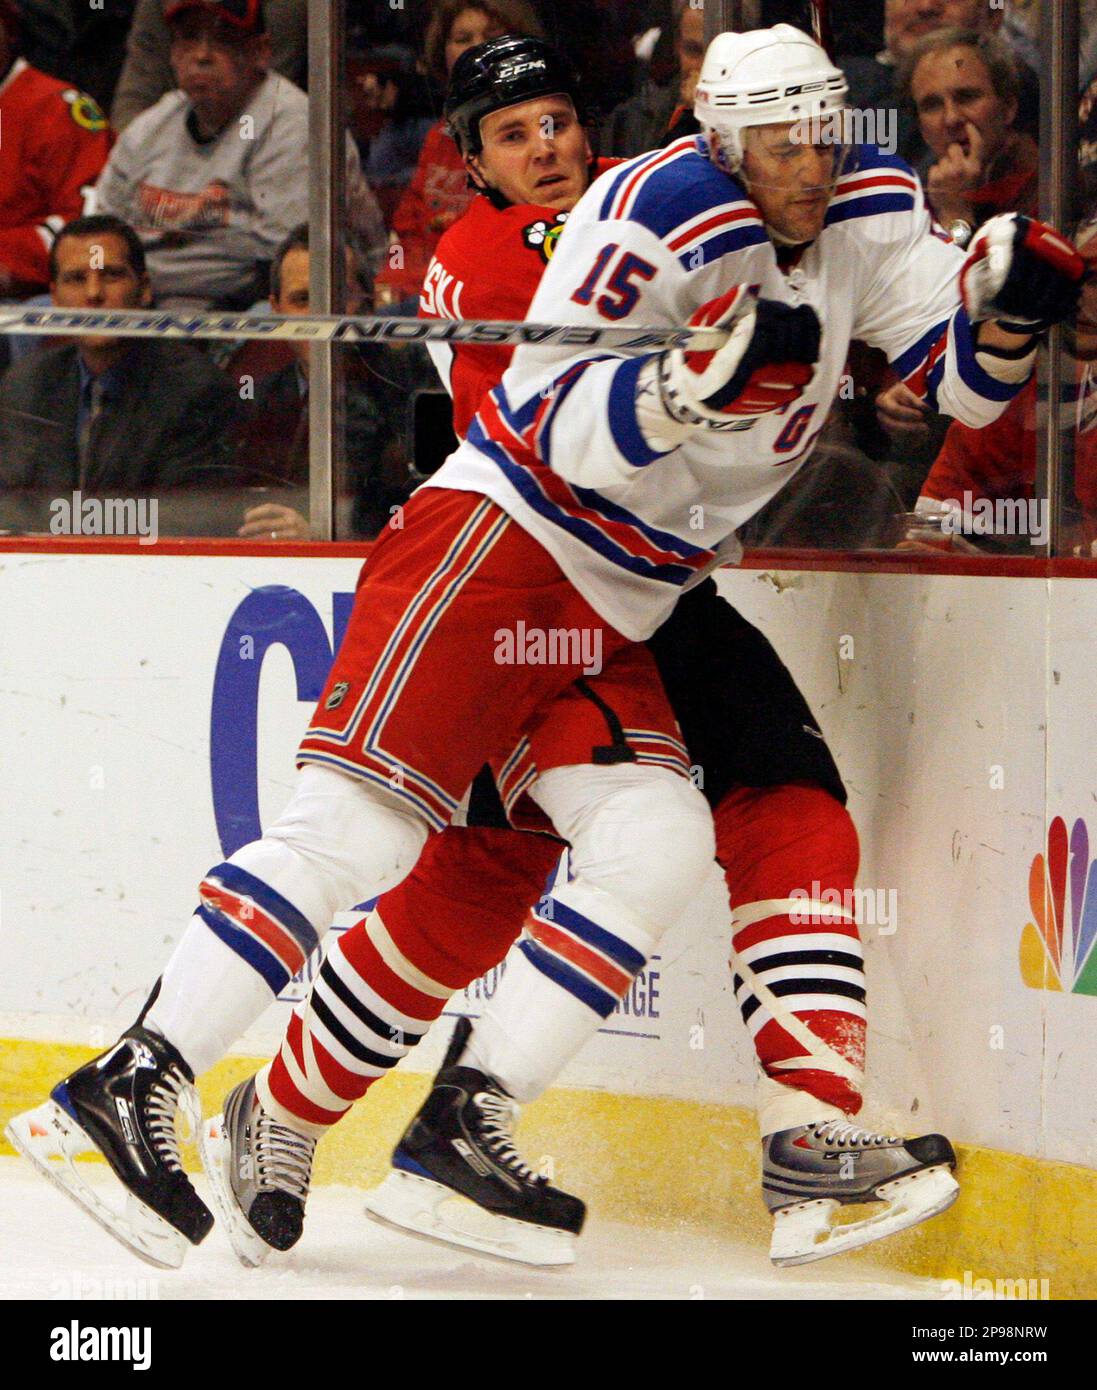 Chicago Blackhawks' James Wisniewski, left, is checked into the boards New  York Rangers' Blair Betts during the first period of an NHL hockey game,  Friday, Jan. 16, 2009, in Chicago.(AP Photo/Nam Y.